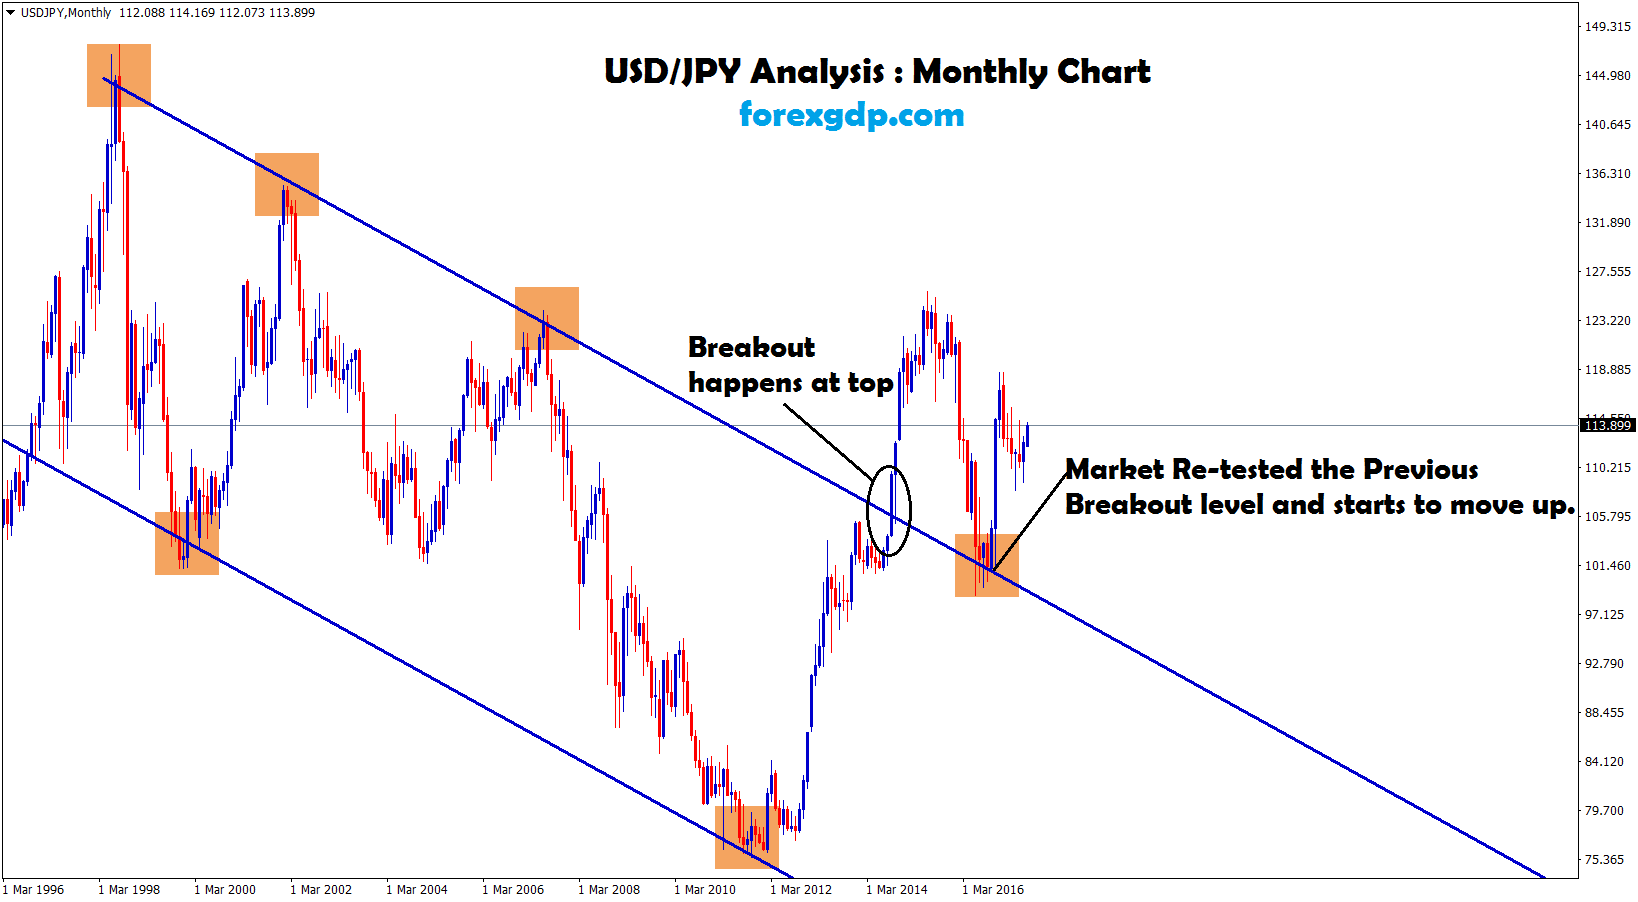 usd jpy forex analysis for breakout and retesting the bounce back